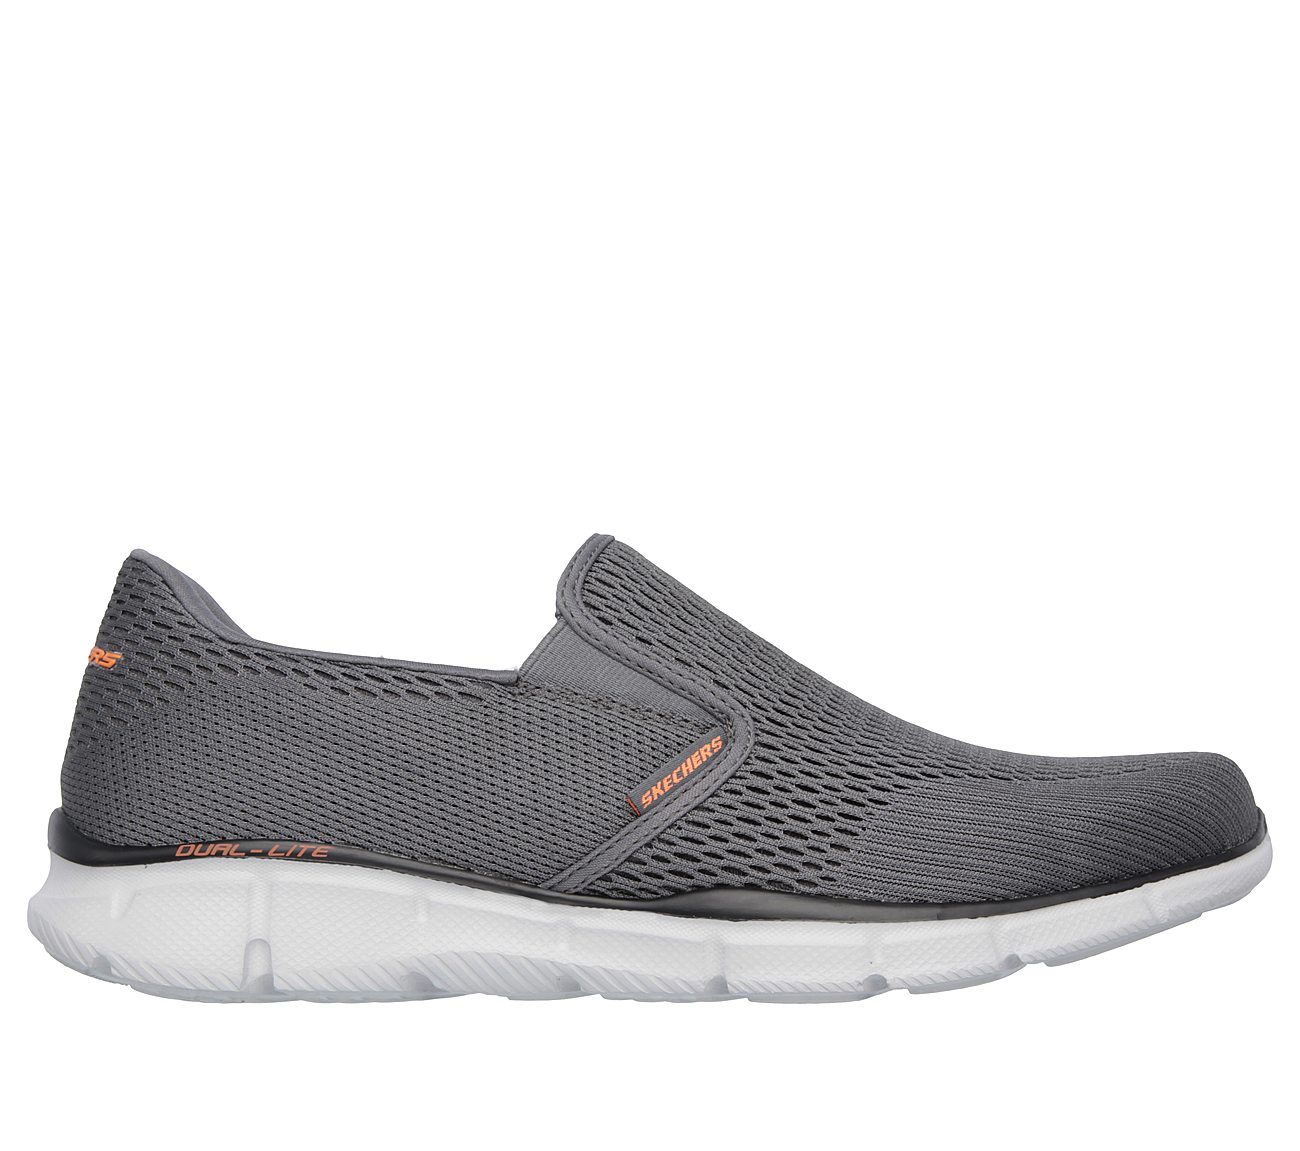 EQUALIZER- DOUBLE PLAY, CHARCOAL/ORANGE Footwear Lateral View